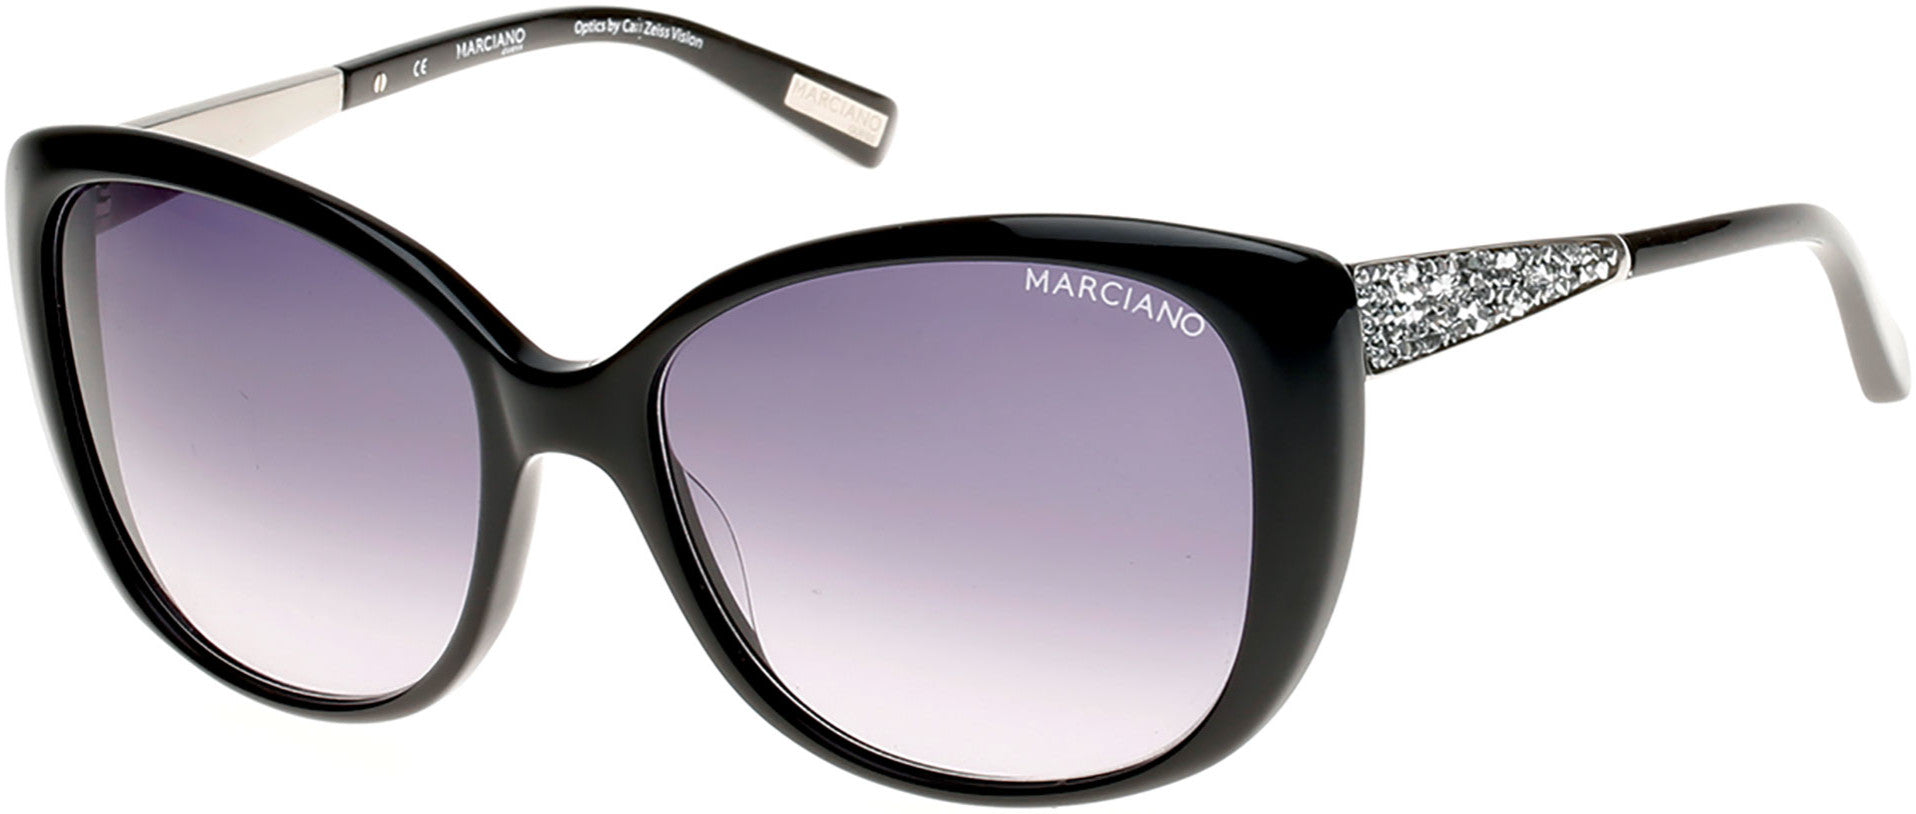 Guess By Marciano GM0722 Cat Sunglasses C38-C38 - Black/smoke Gradient Lens